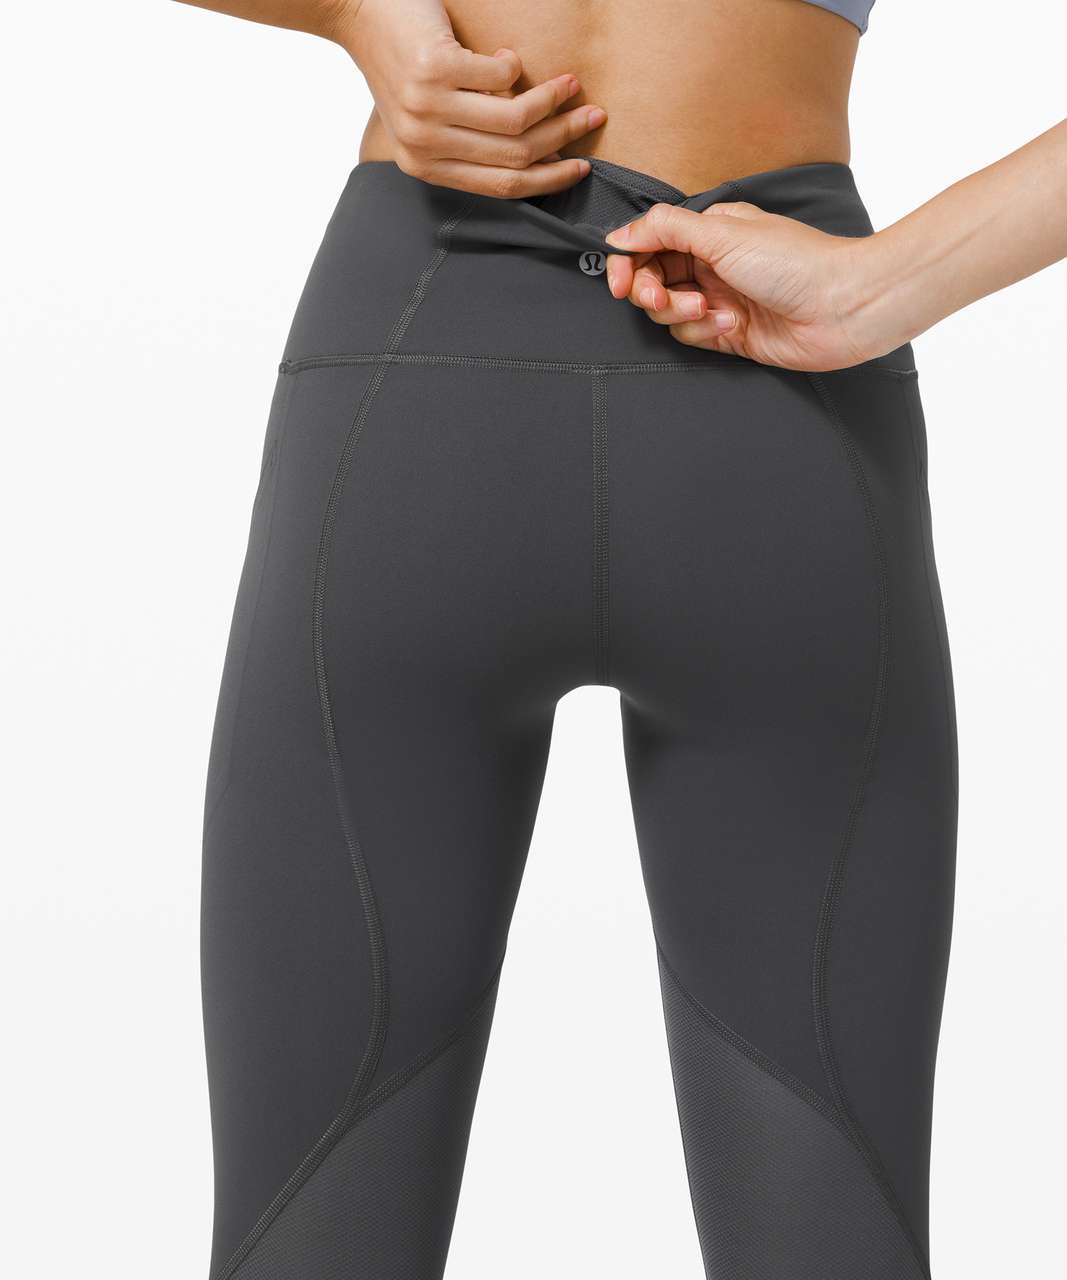 Lululemon Pace Rival High-Rise Crop 22" - Graphite Grey